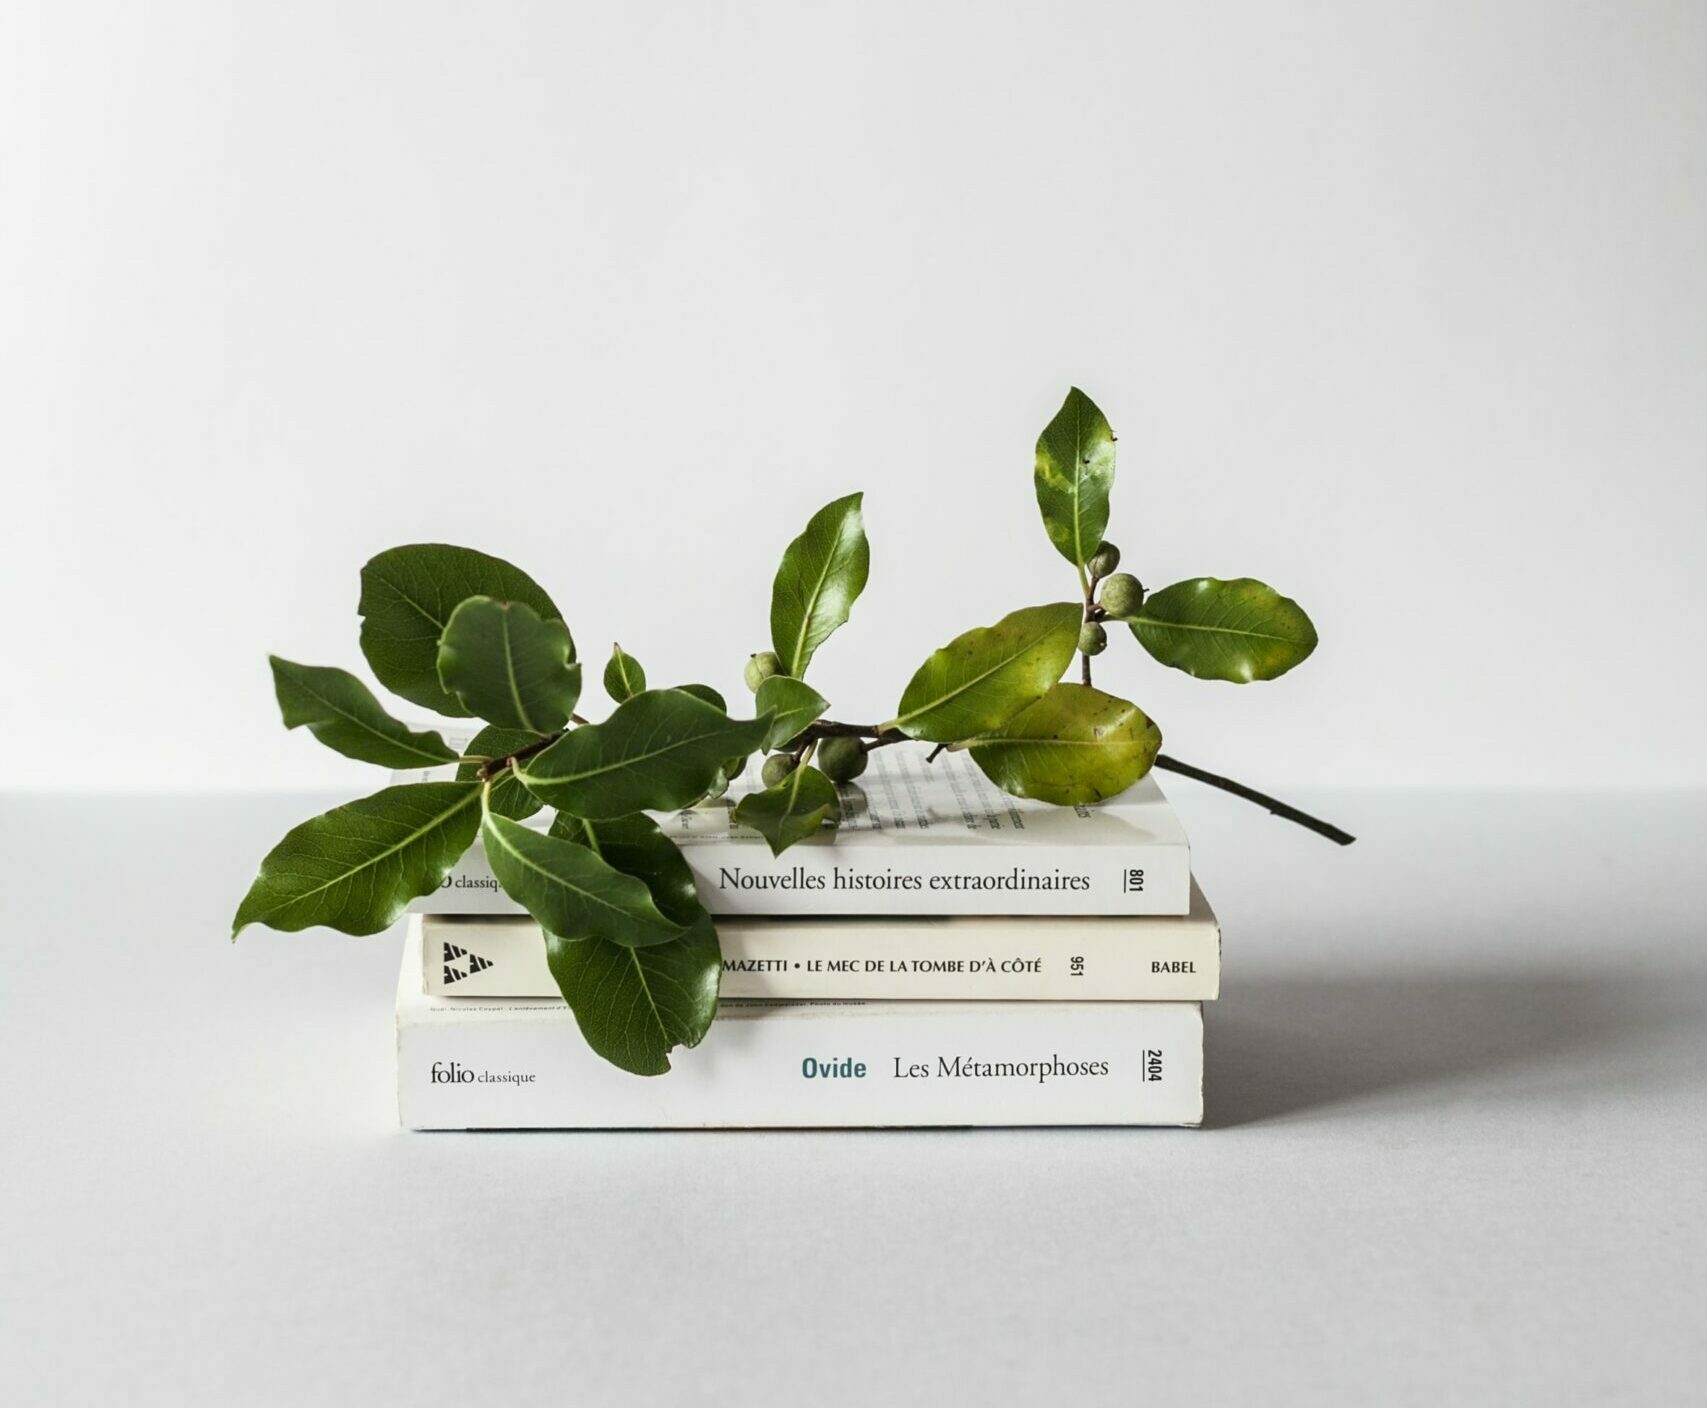 learn - books stacked with brach with leaves on top